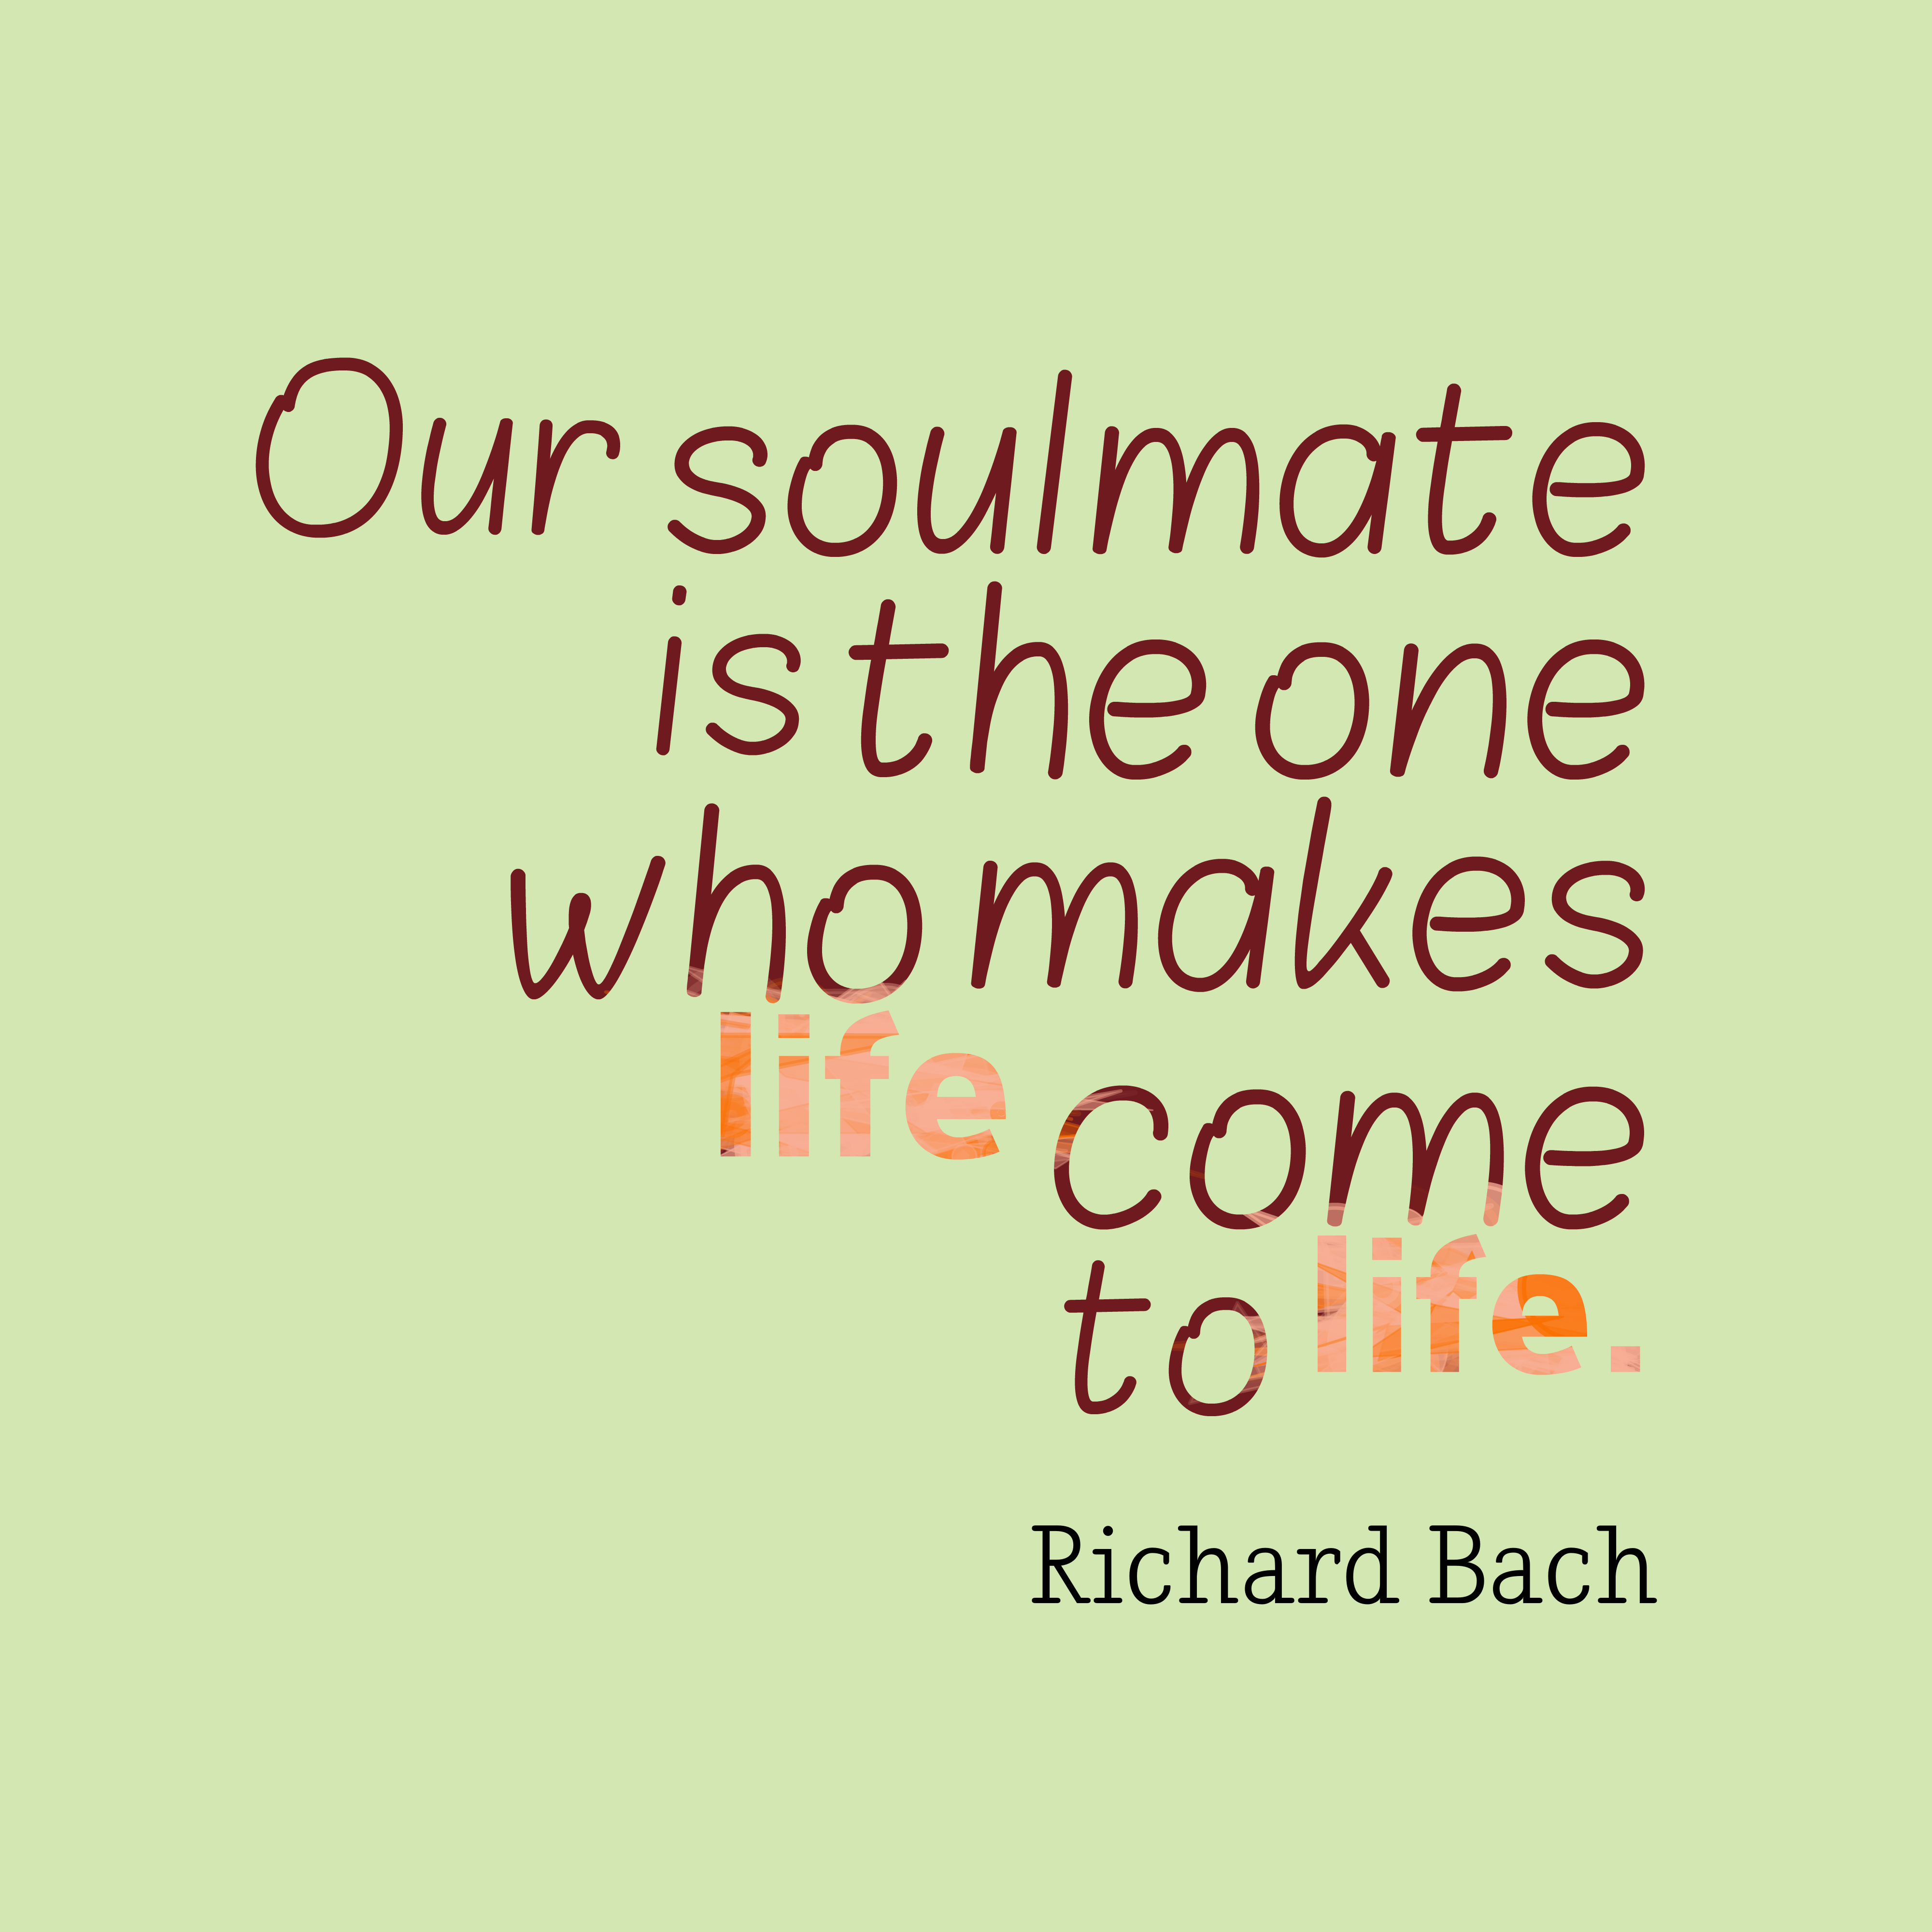 30+ Soul mate Quotes and Wishes